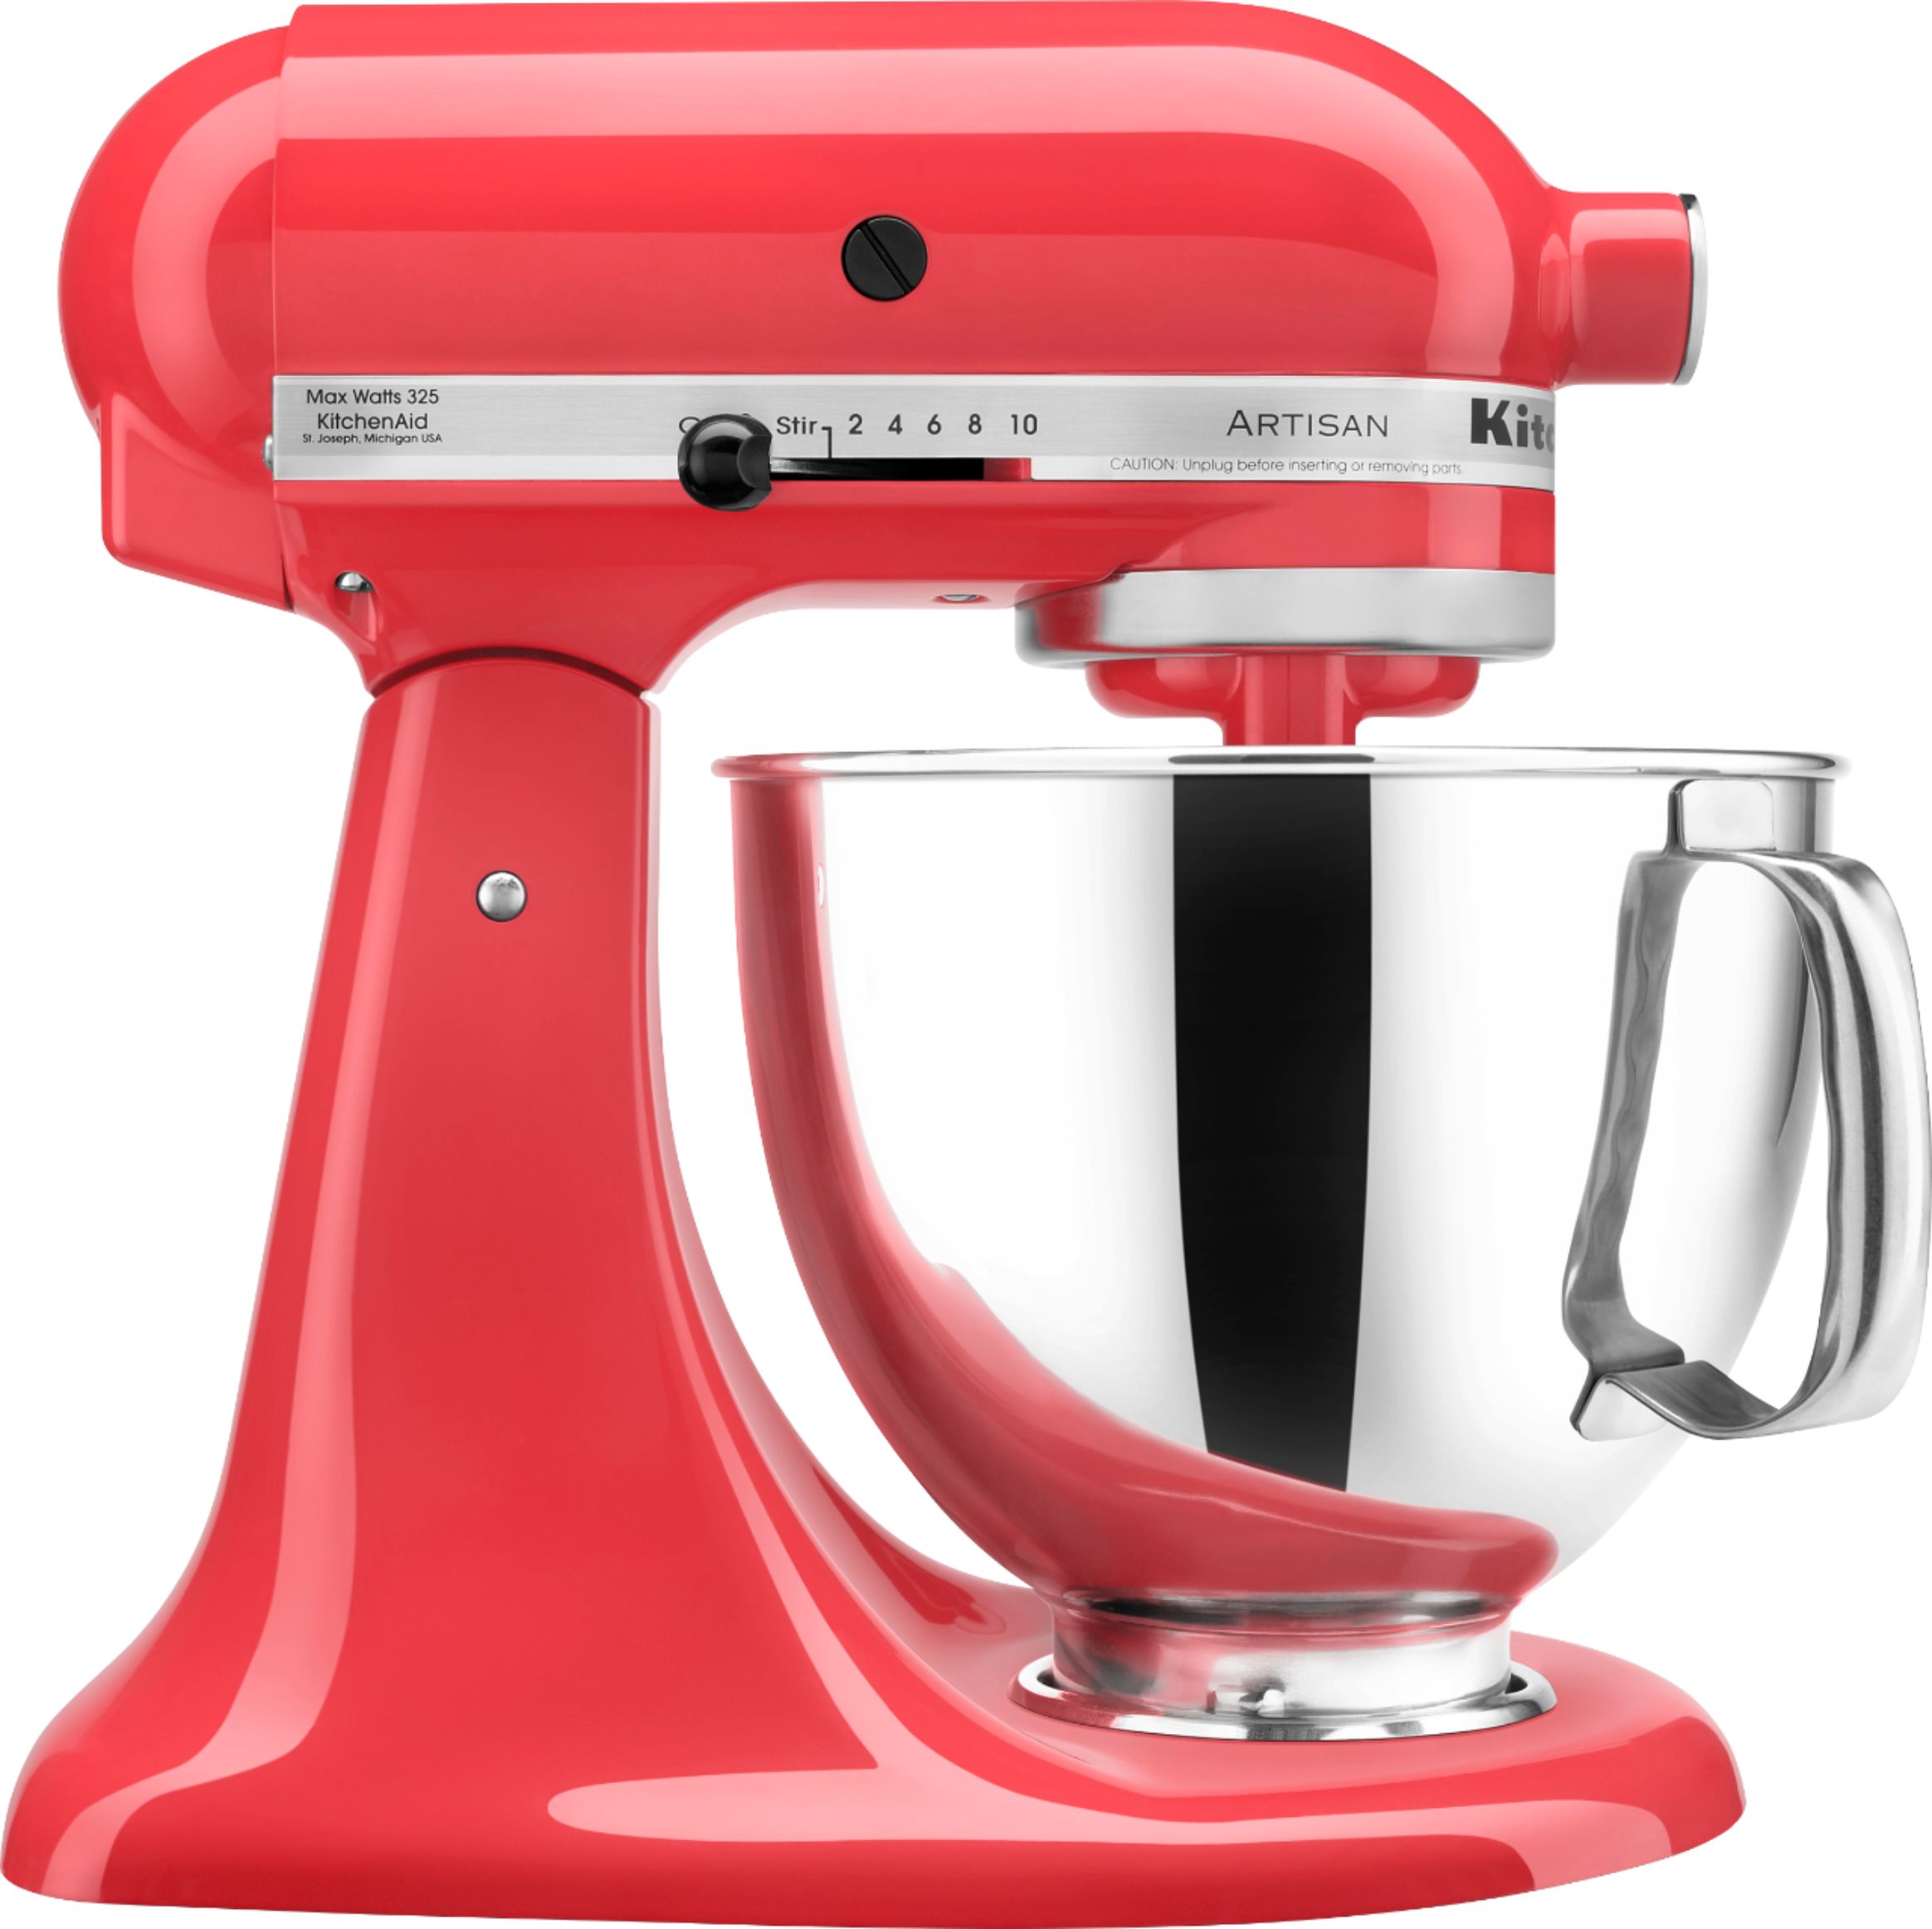 The best deals on KitchenAid stand mixers and mixer accessories